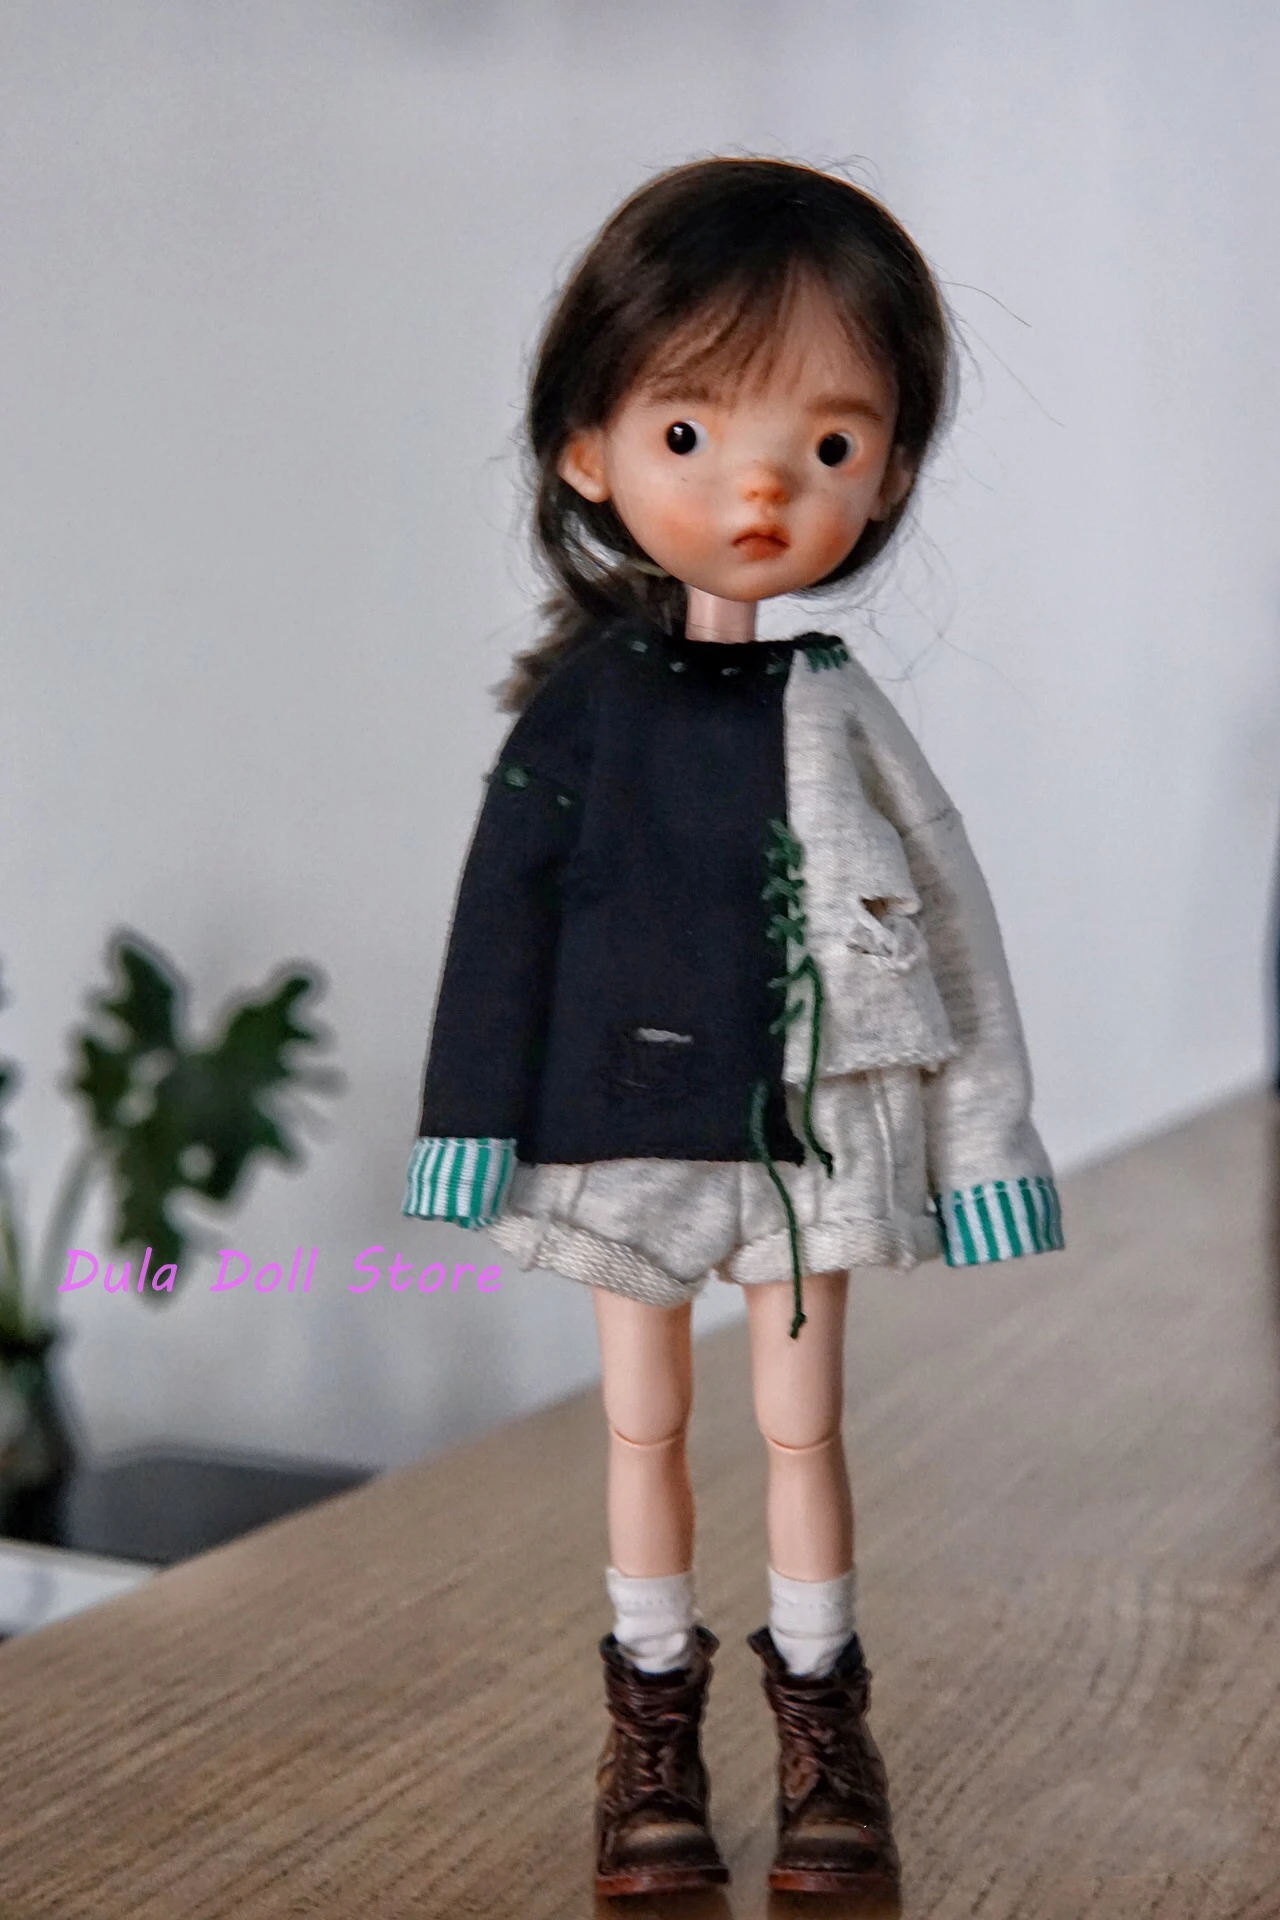 

Dula Doll Clothes Dress Tattered splicing Trouser set Blythe ob24 ob22 Azone Licca ICY JerryB 1/6 Bjd Doll Accessories